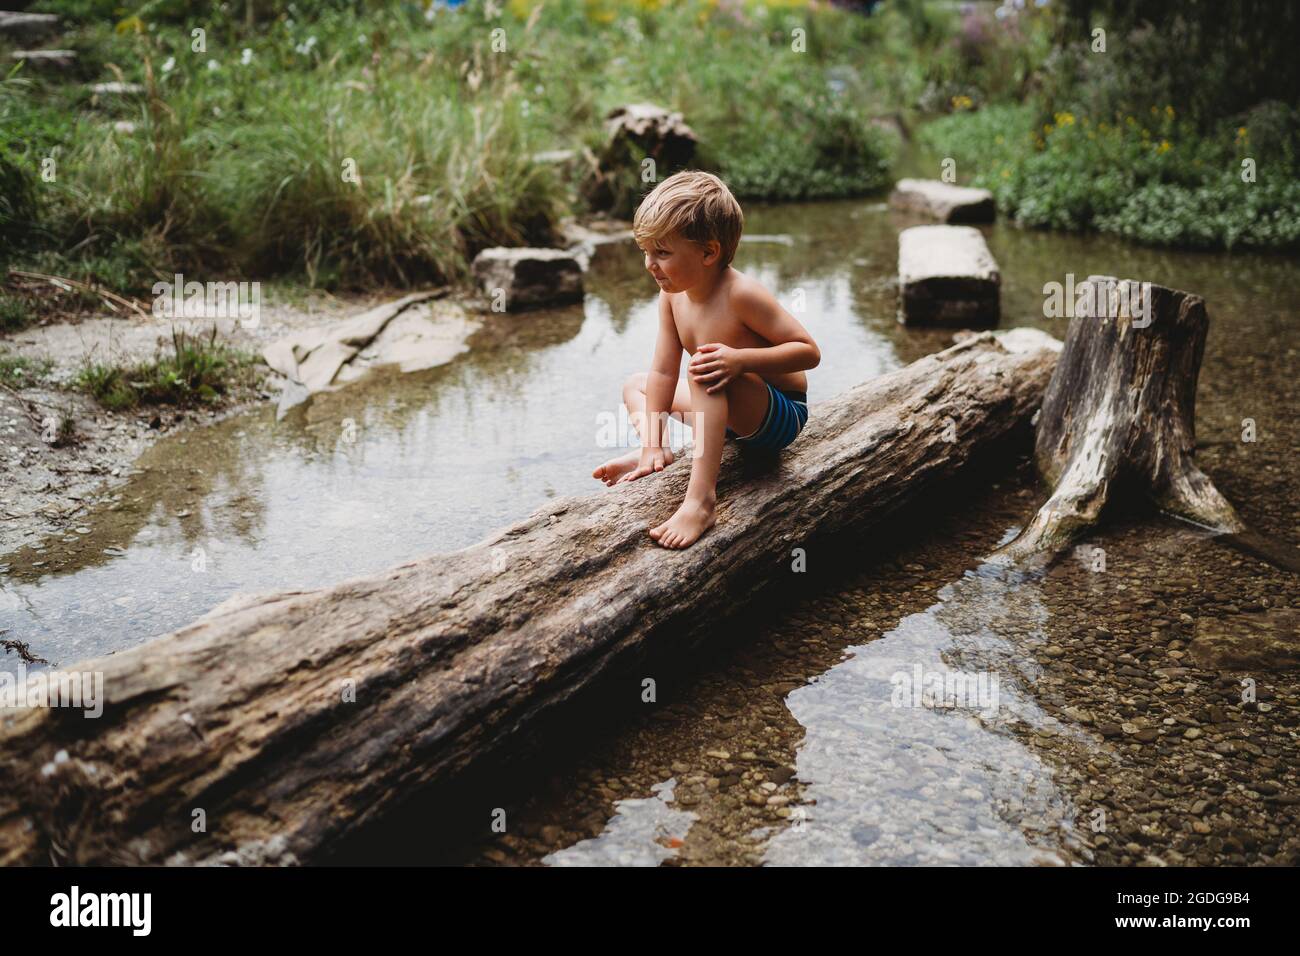 Young boy sitting on log in water in summer looking thoughtful Stock Photo